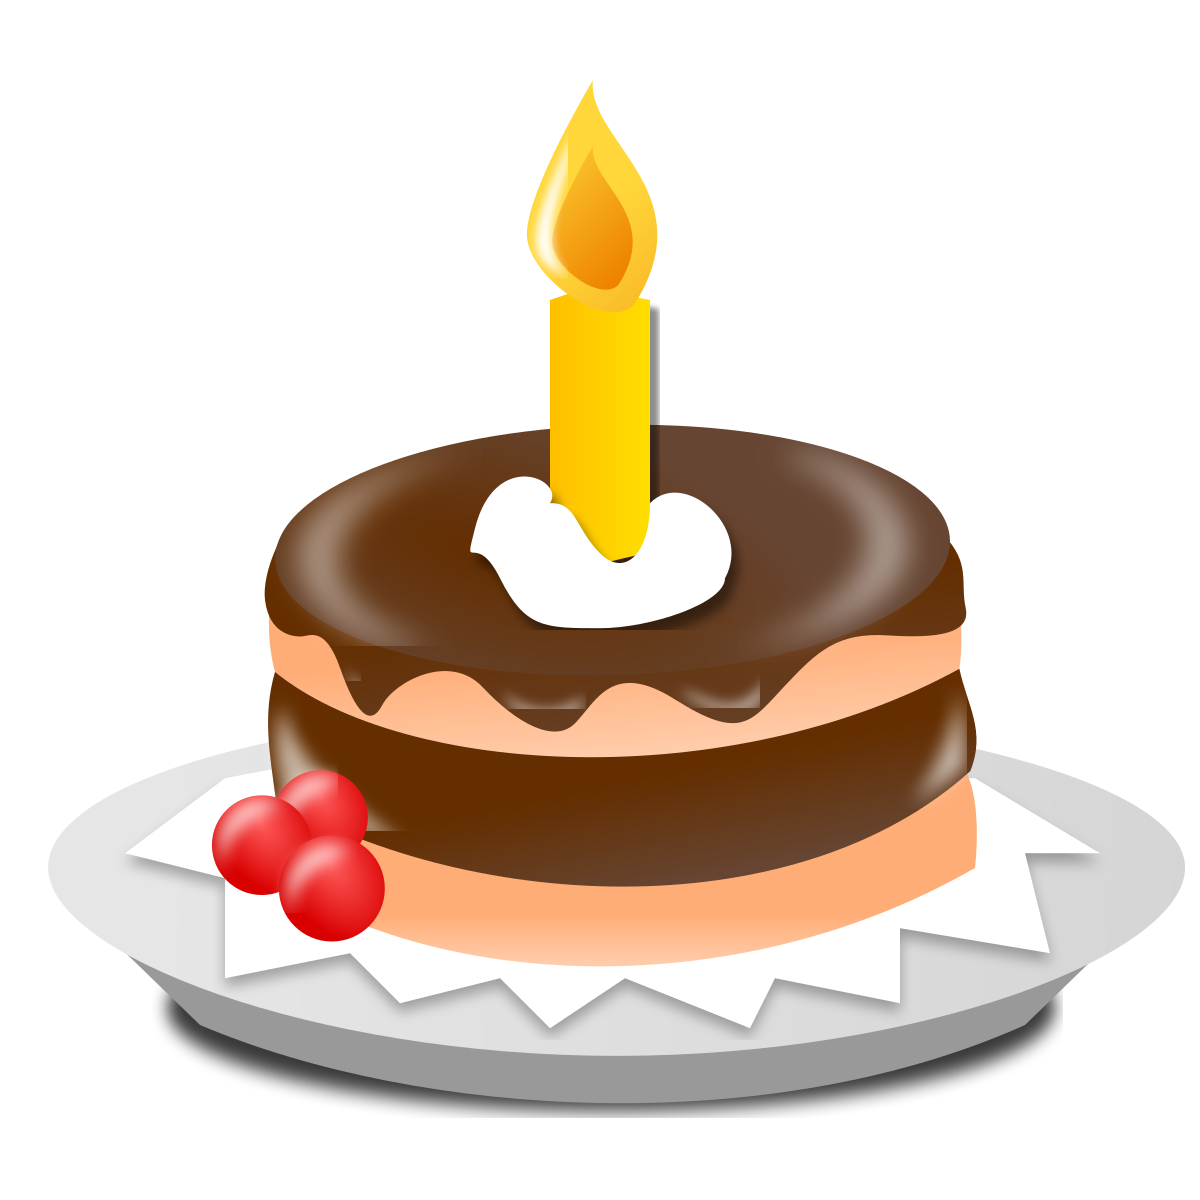 Download File:Birthday Icon.svg - Wikimedia Commons